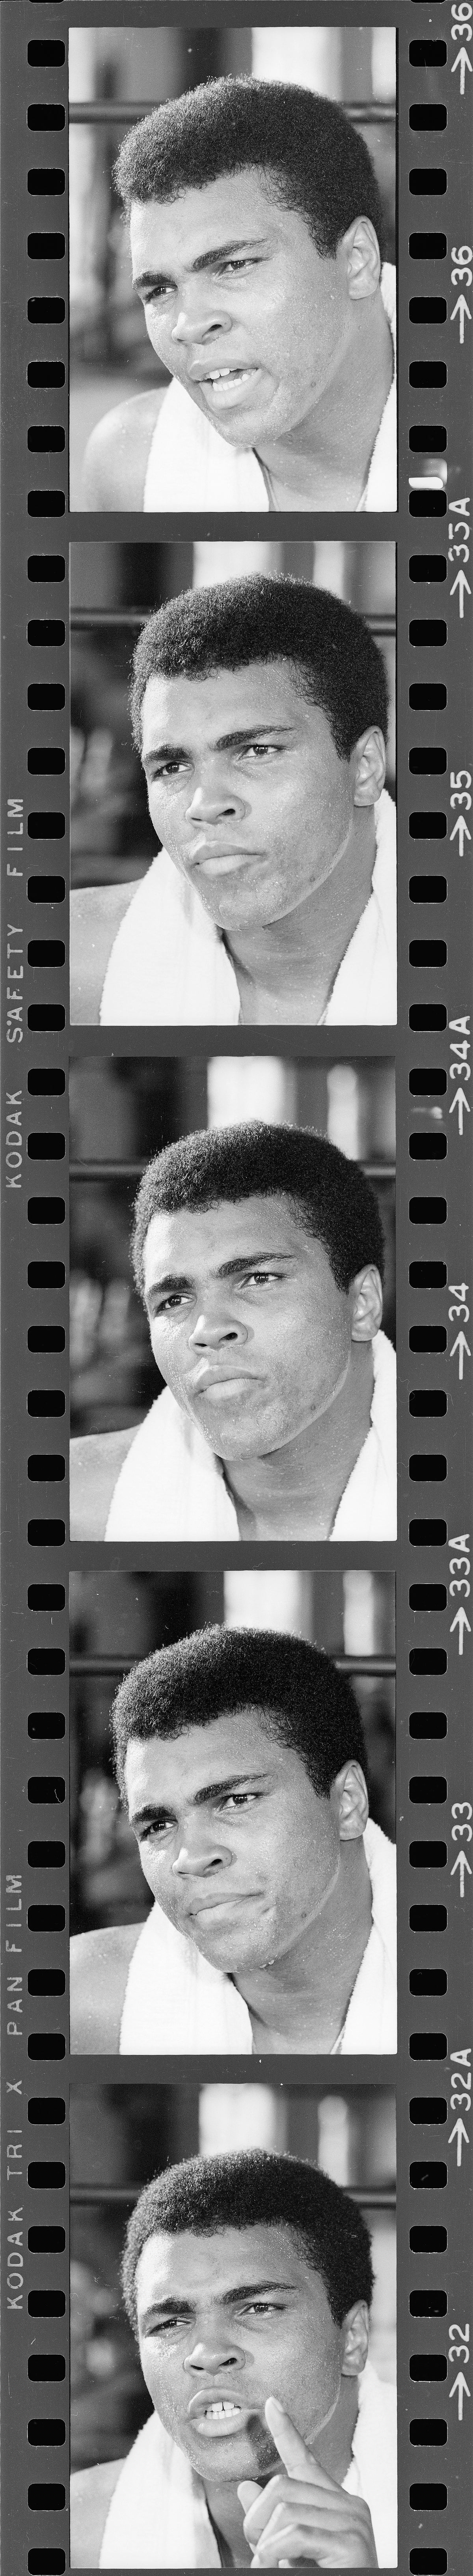 Muhammad Ali's Face with Towel (Strip)